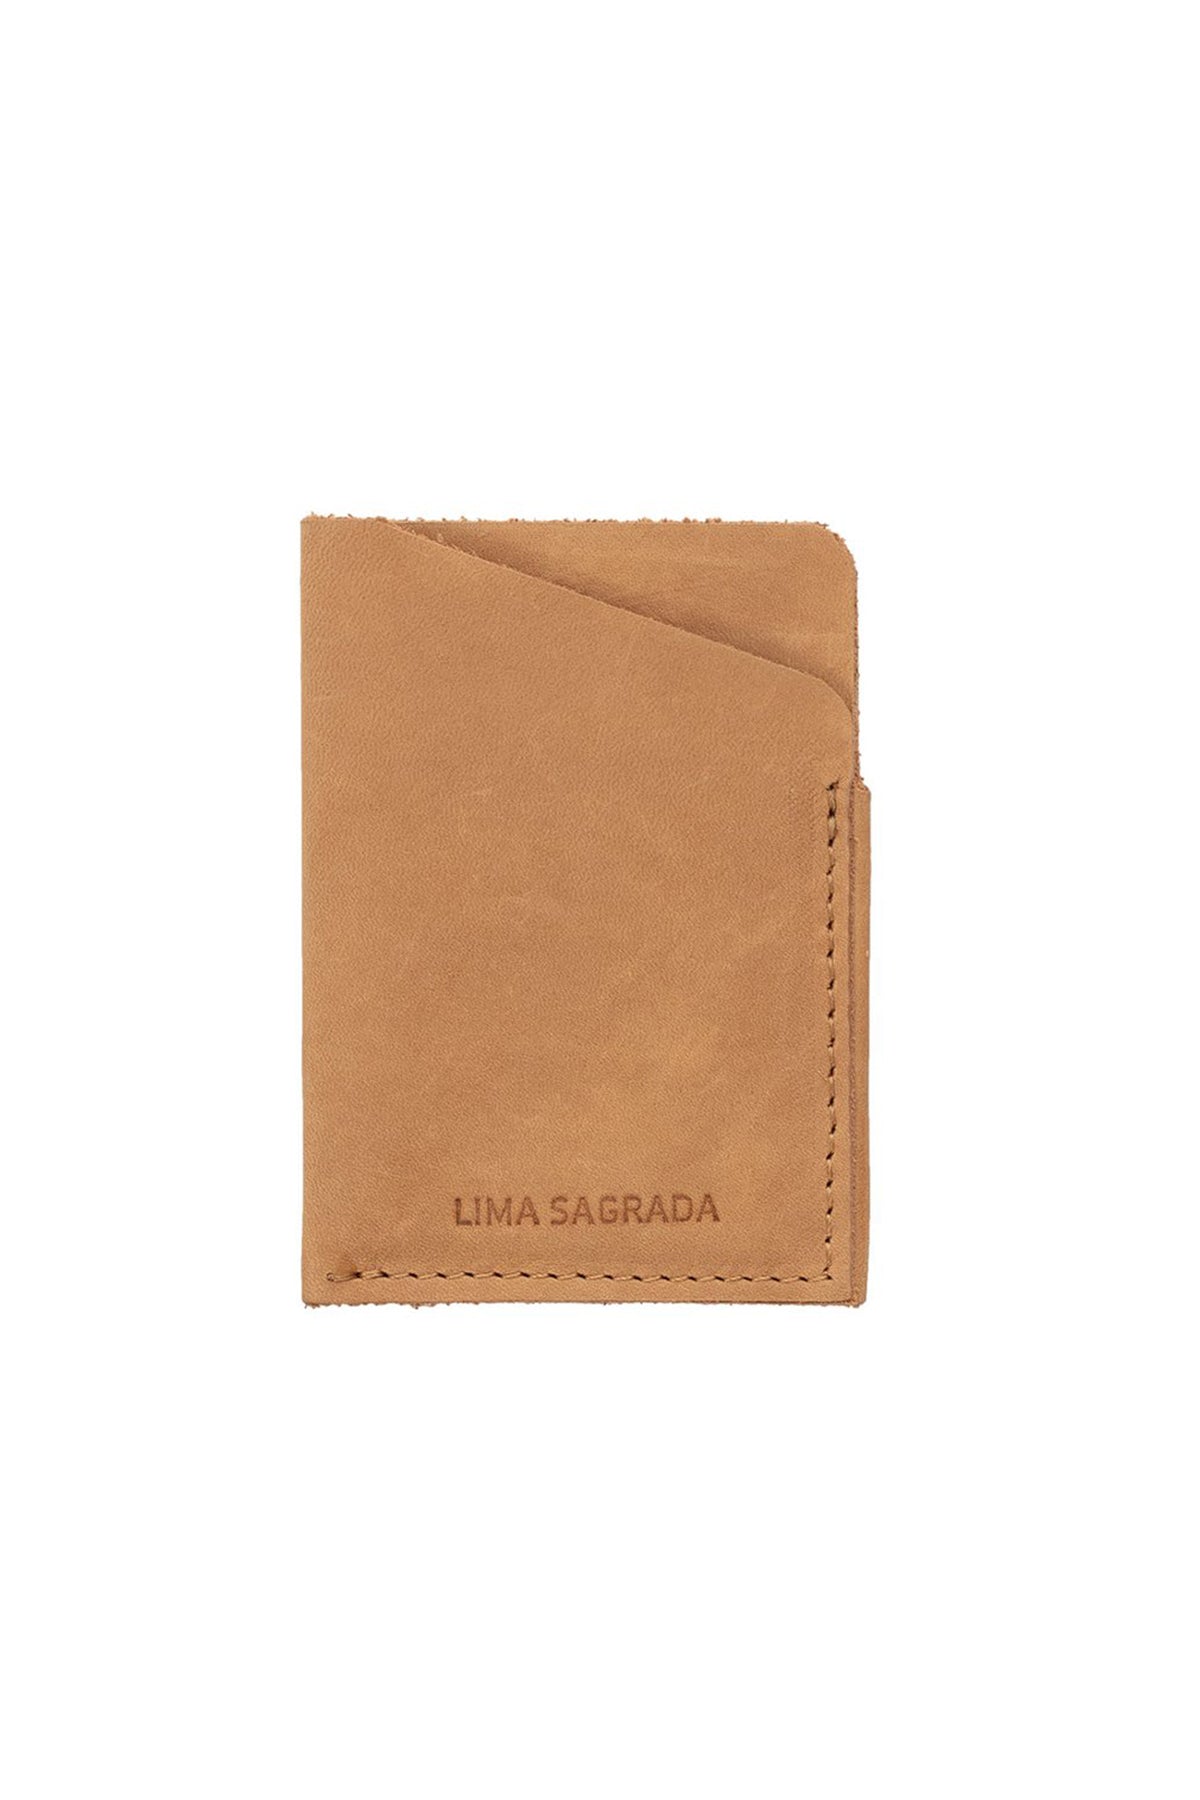 A SOFT LEATHER CARD HOLDER BY LIMA SAGRADA by local artisans with the word ema sagara on it.-600106762321